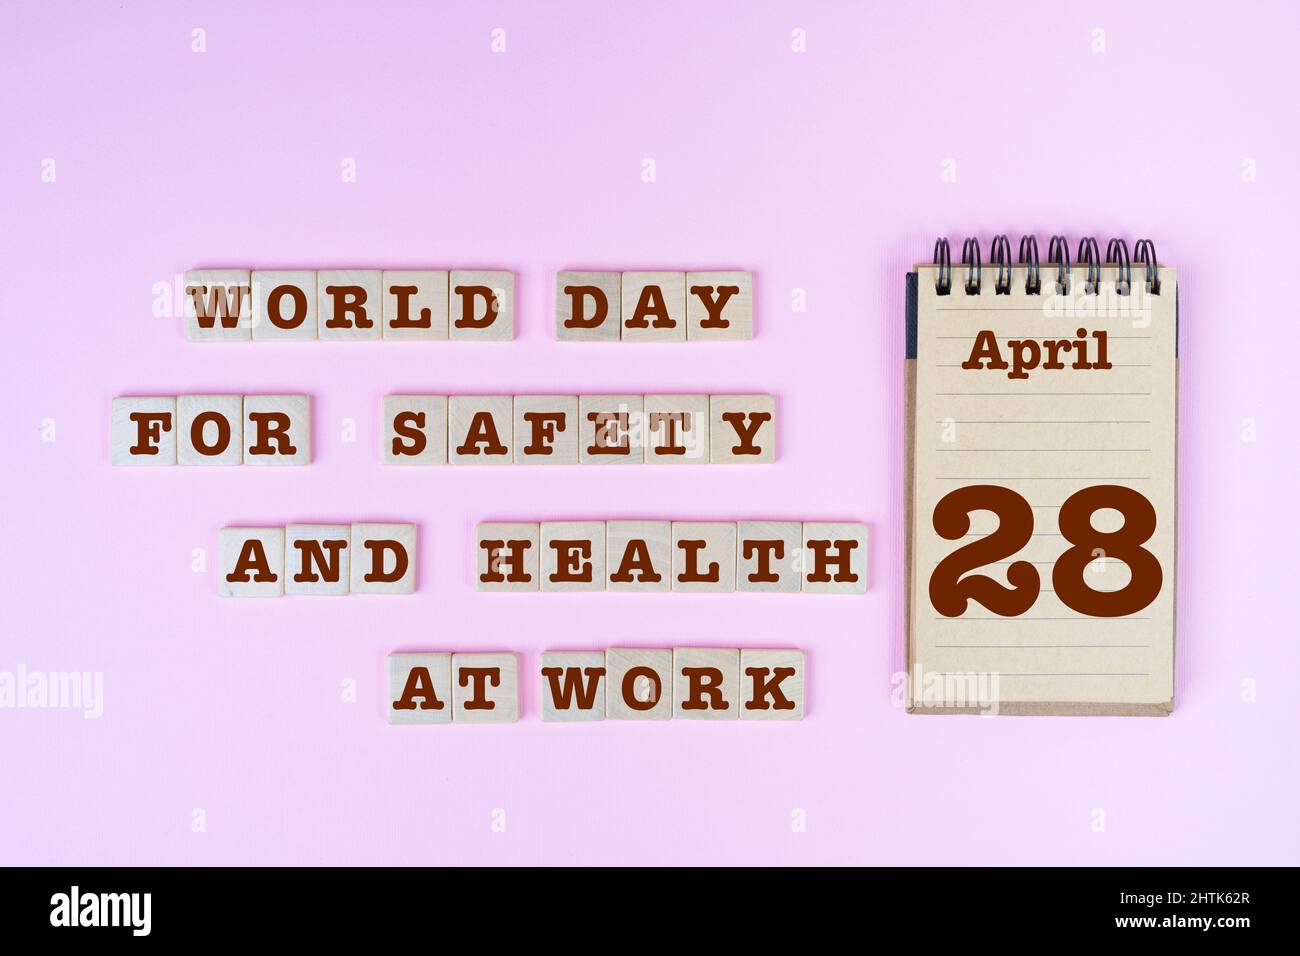 celebration concept of United Nations World Day for Safety and Health at Work the April 28 Stock Photo